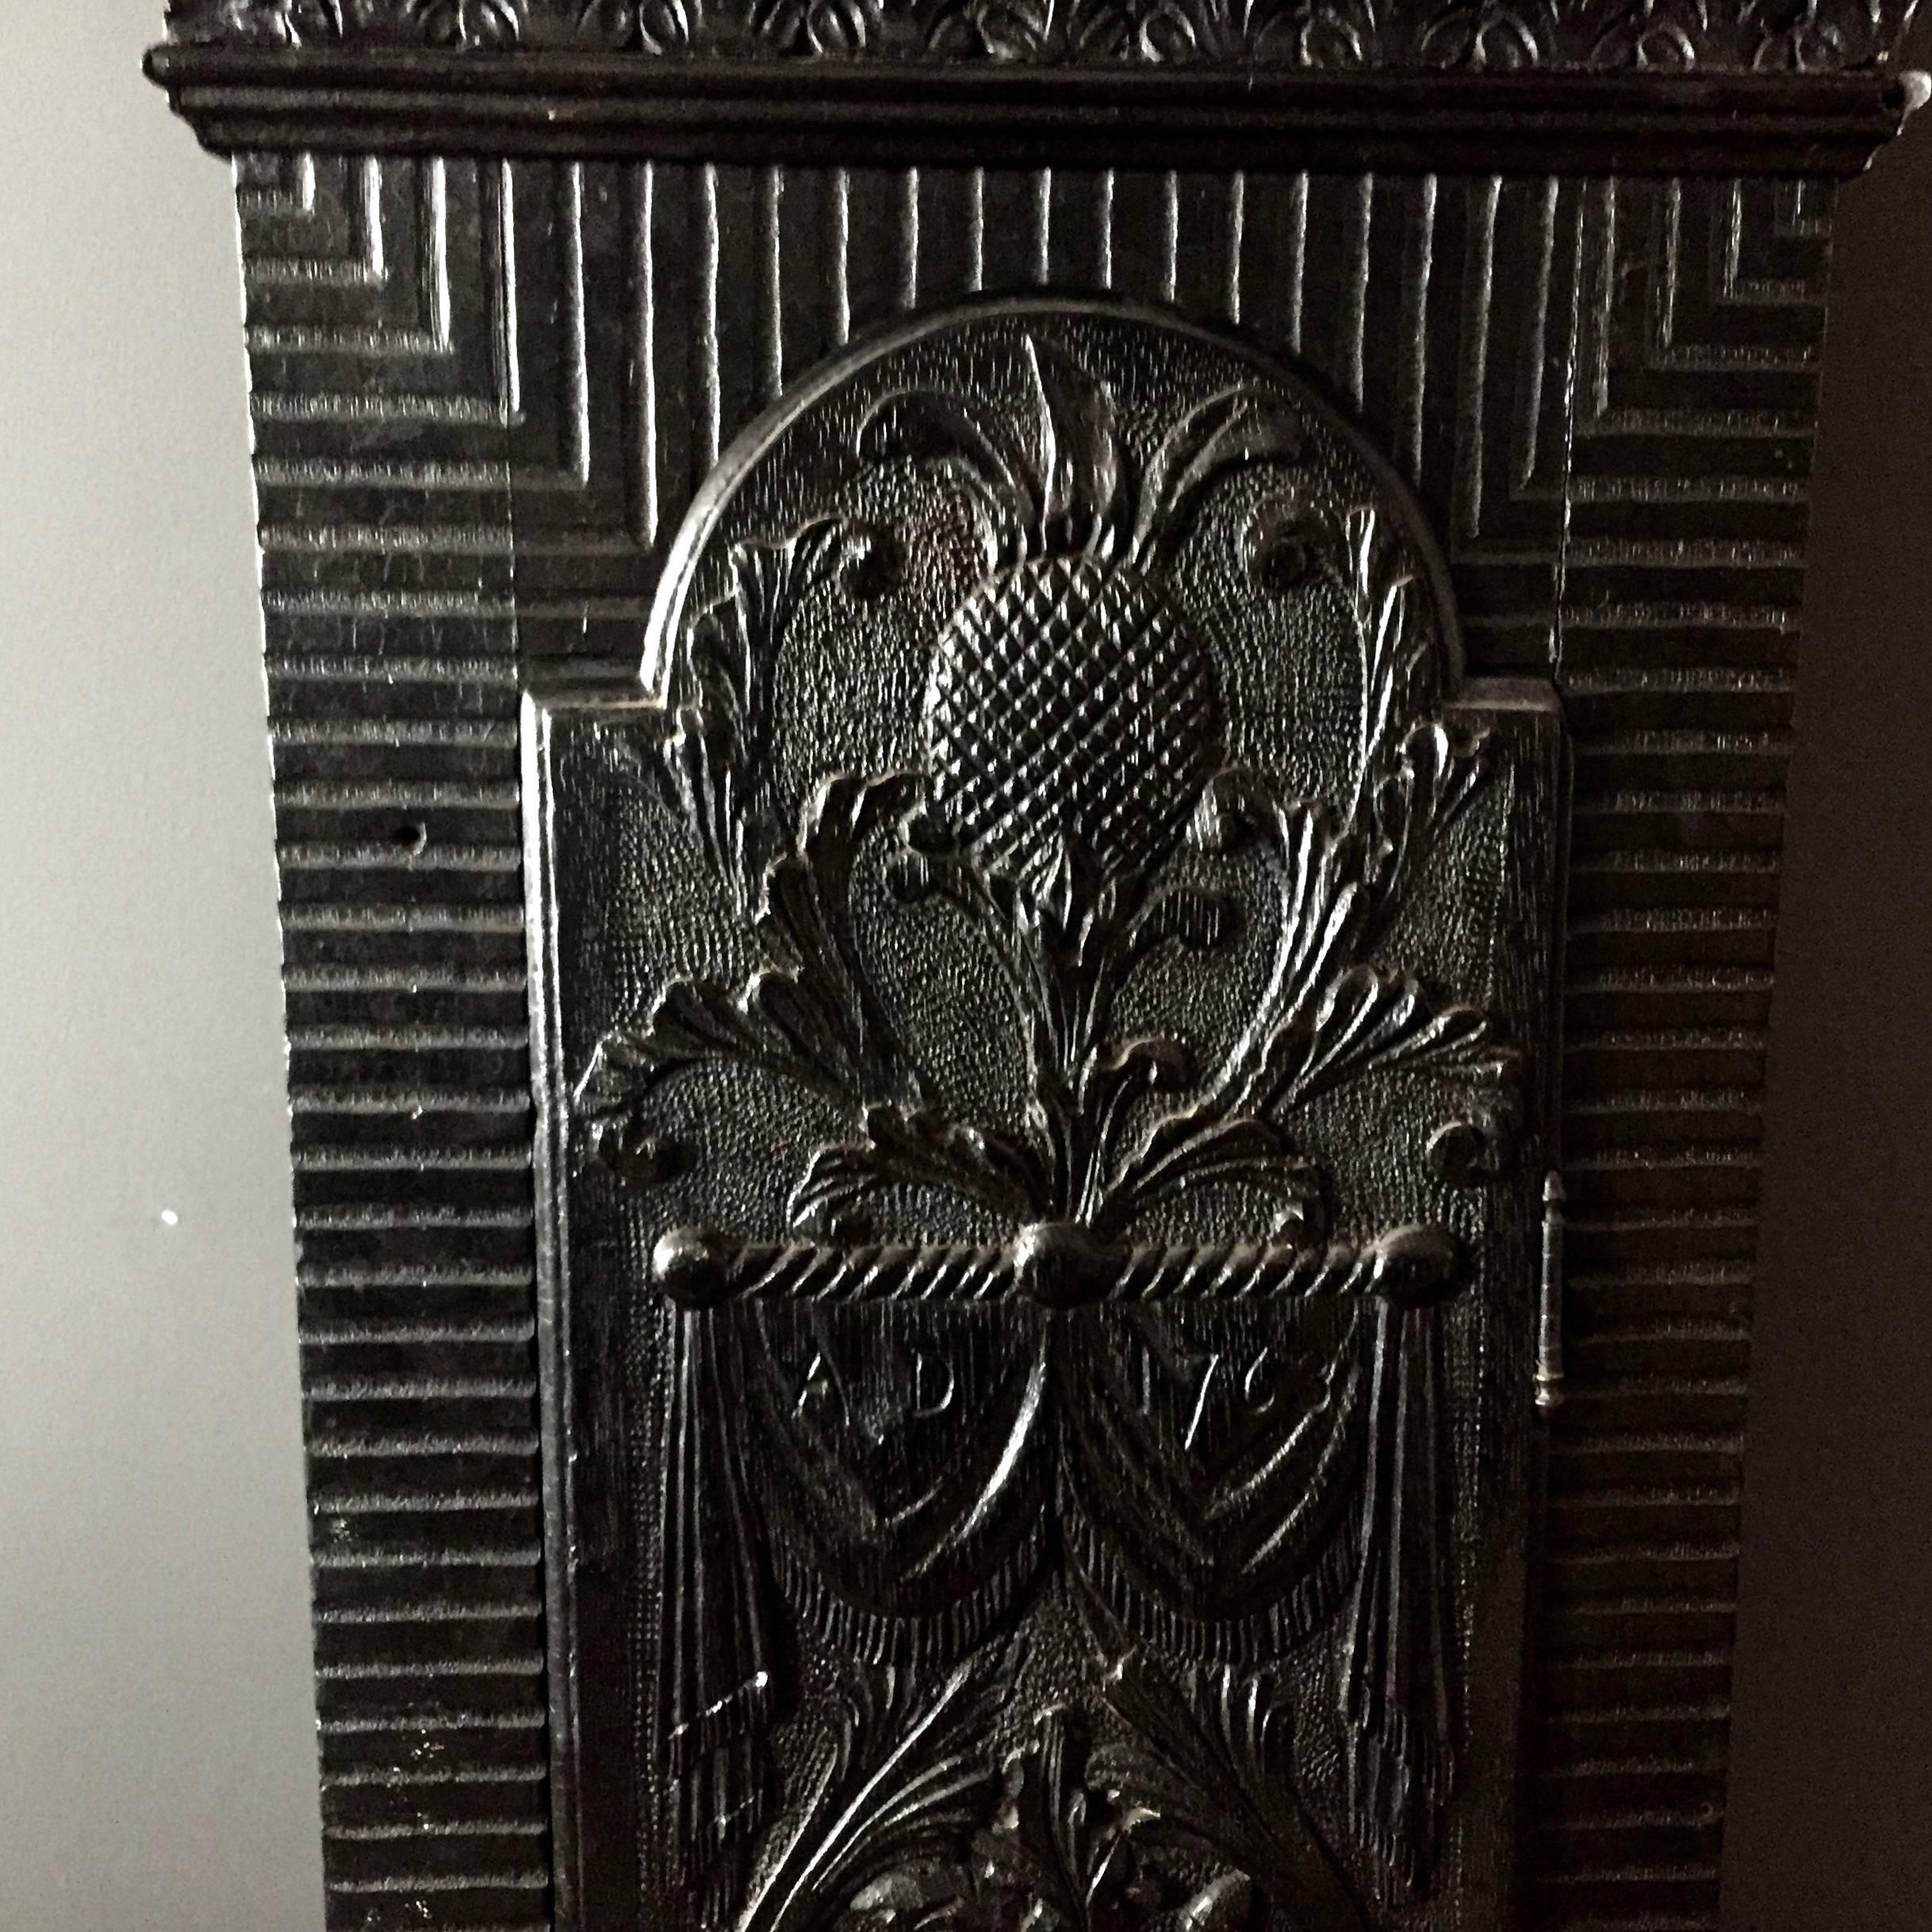 Mid-18th Century English Black Polished Ornately Carved Tall Case Clock 1